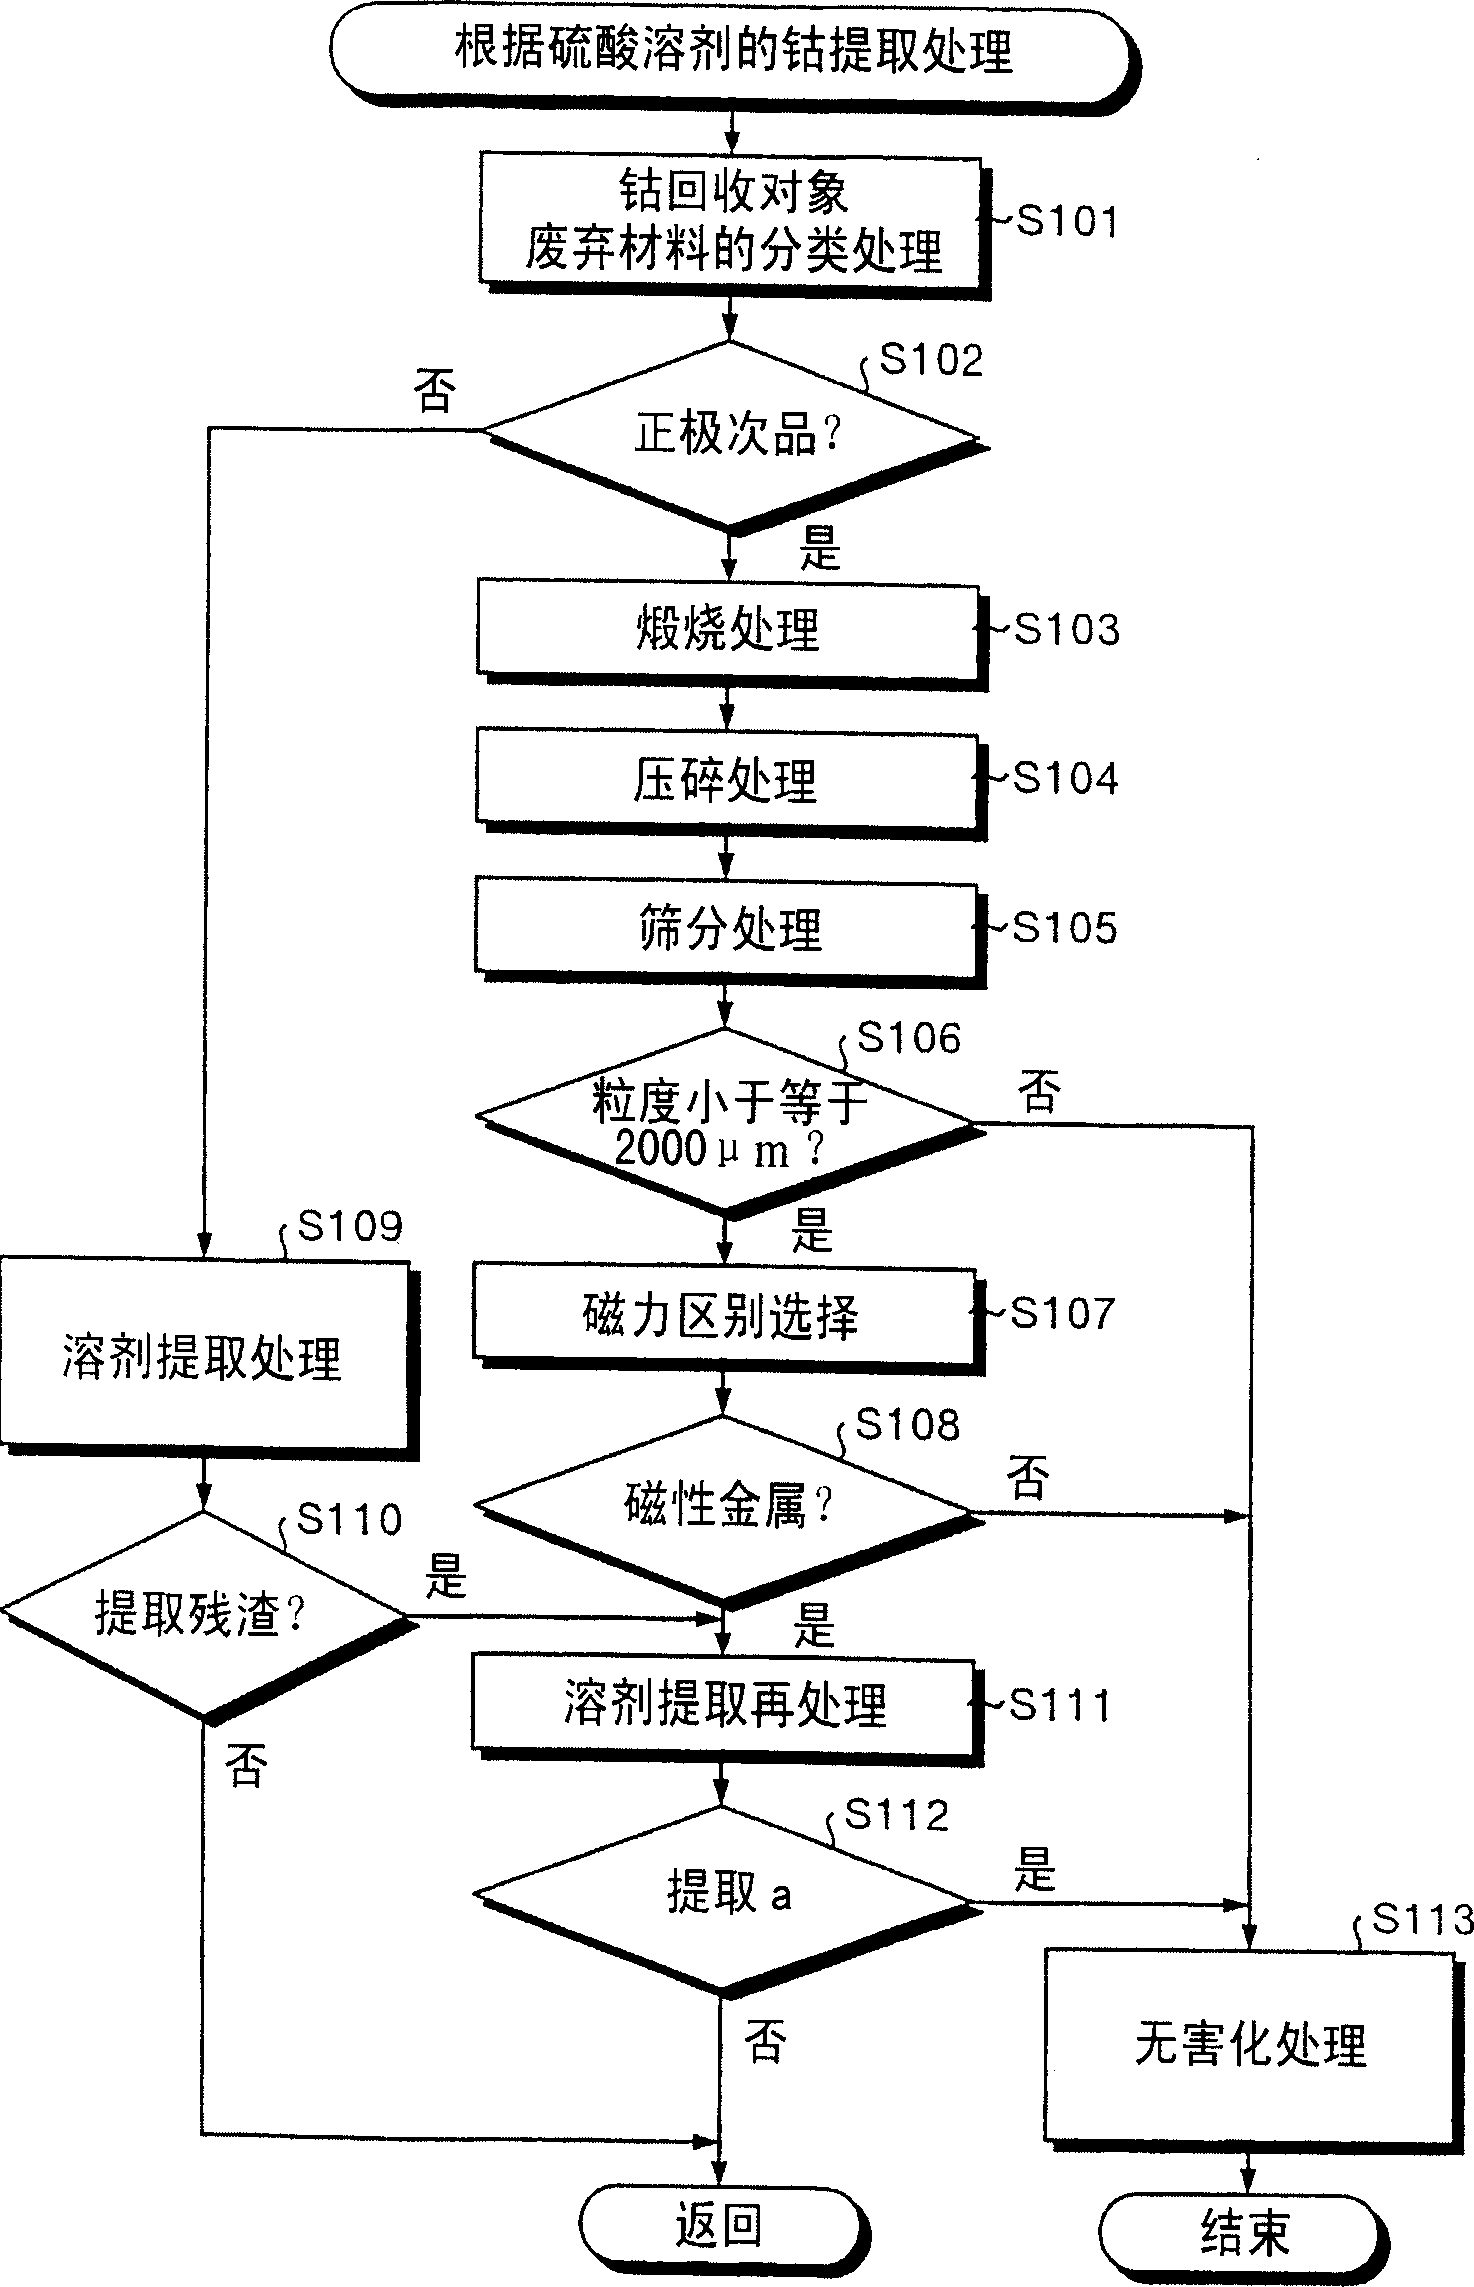 Method of recovering cobalt from lithium ion battery and cobalt recovering system